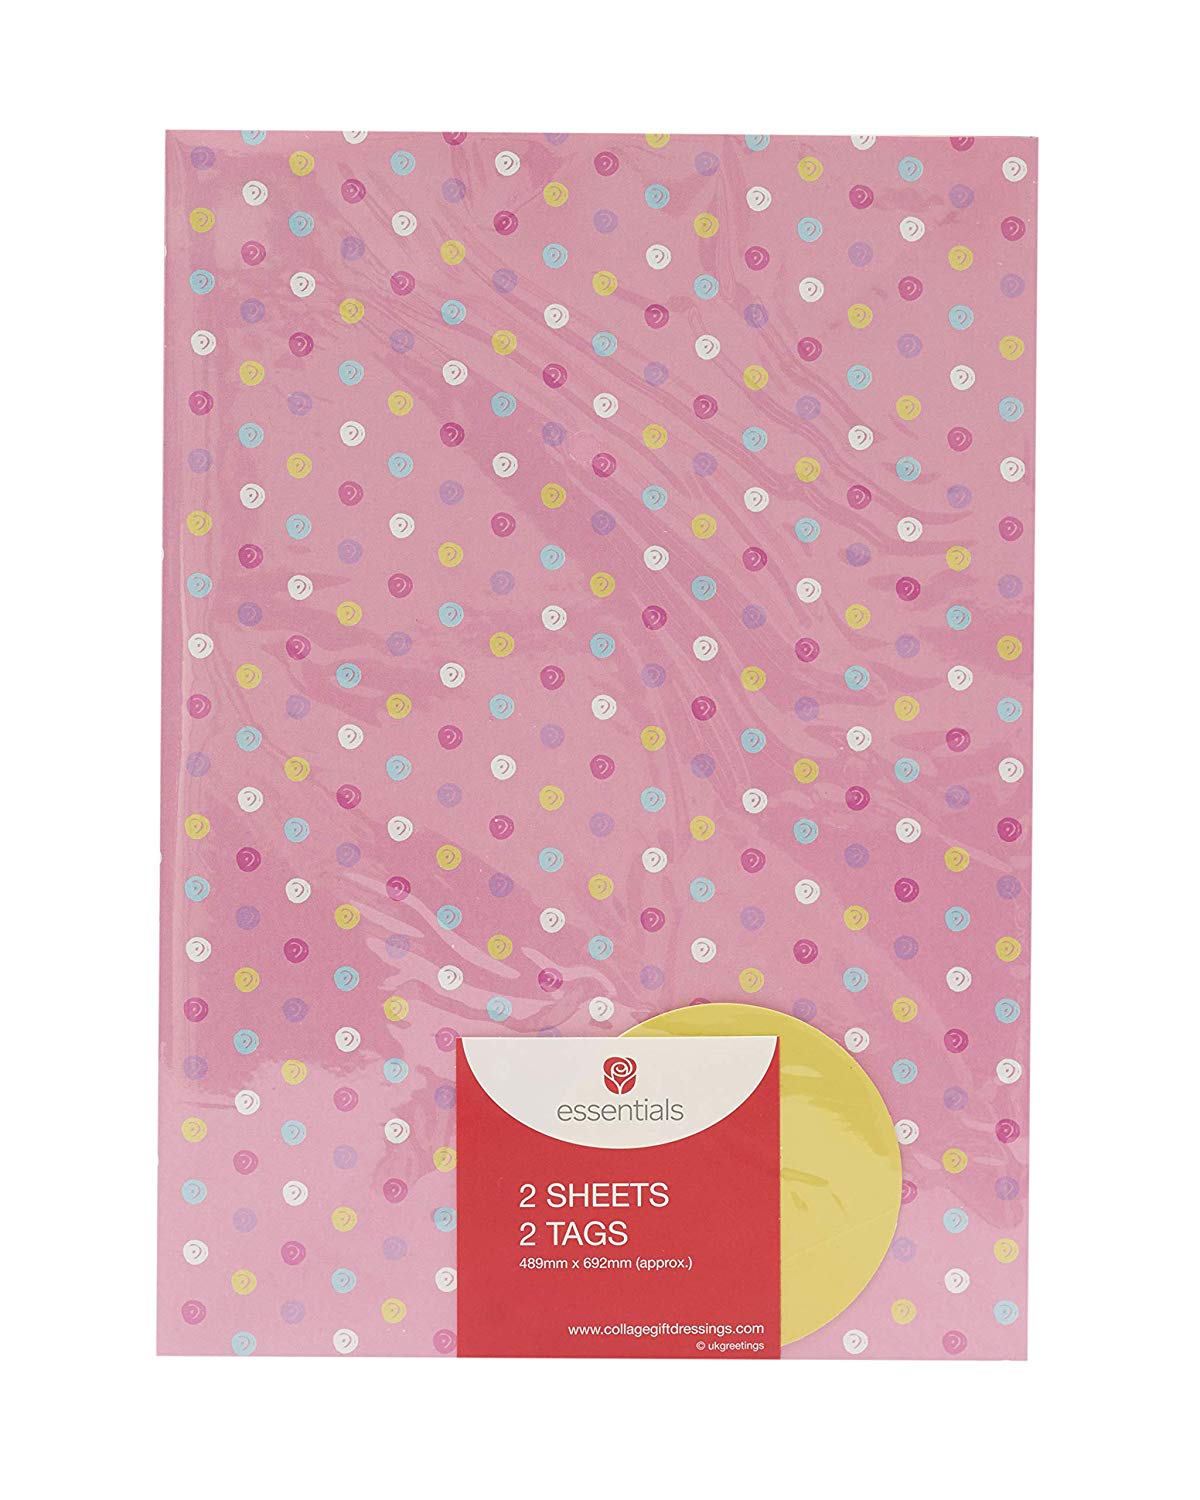 Perfect Pink Gift Wrap Sheets for Birthdays 2 Sheets and 2 Tags 